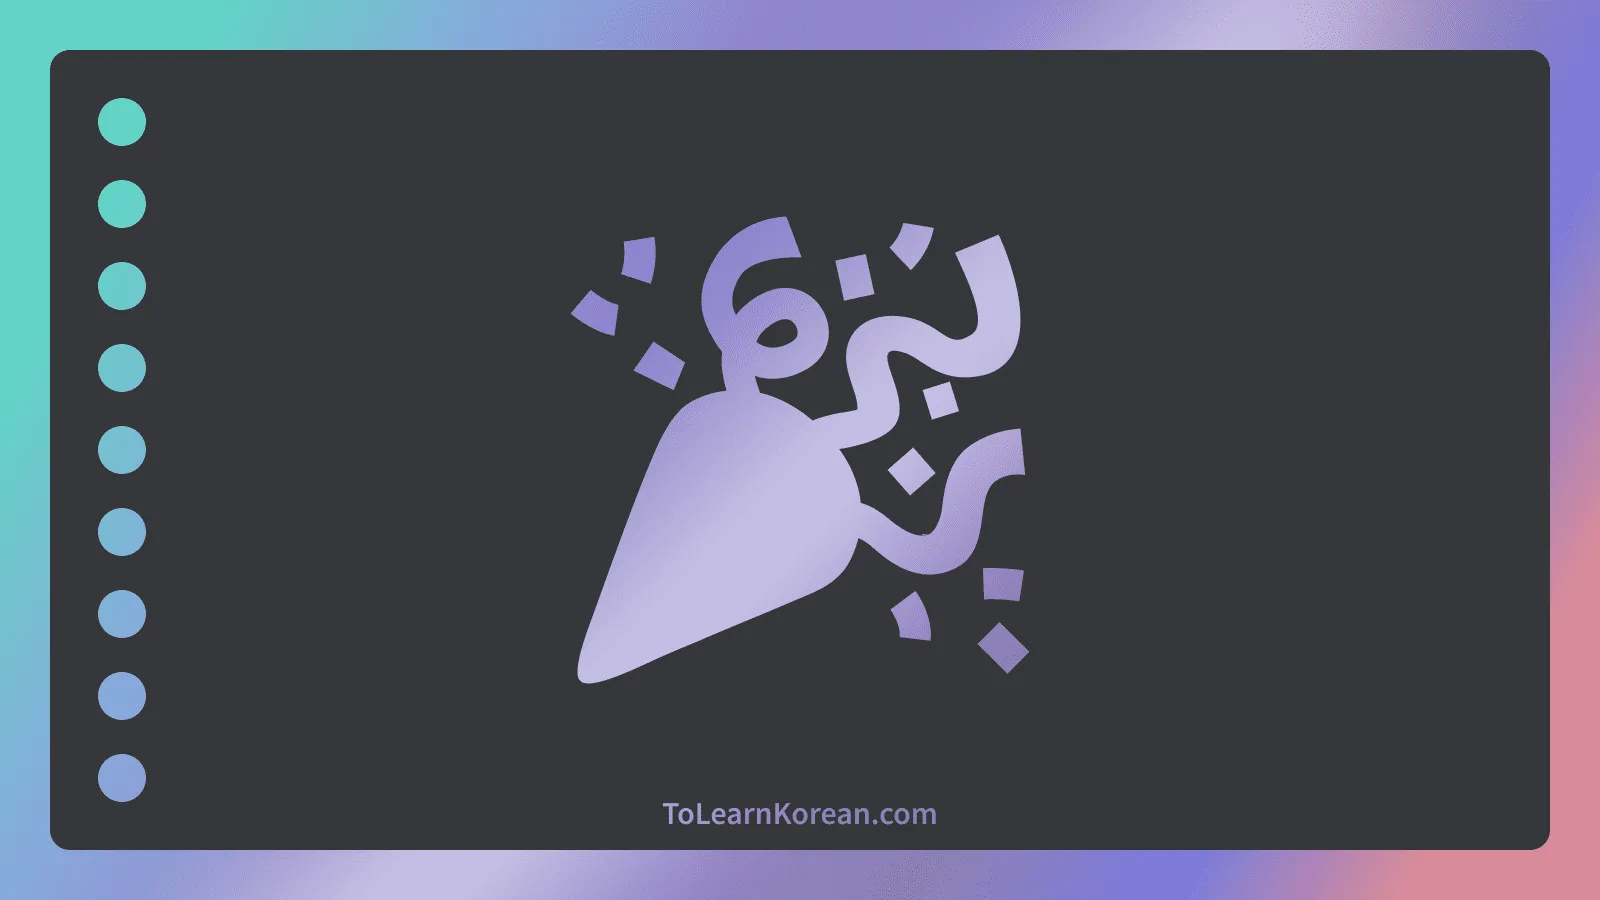 Simple illustration with a gradient background, the title icon which is a celebration emoji is placed prominently in the center.